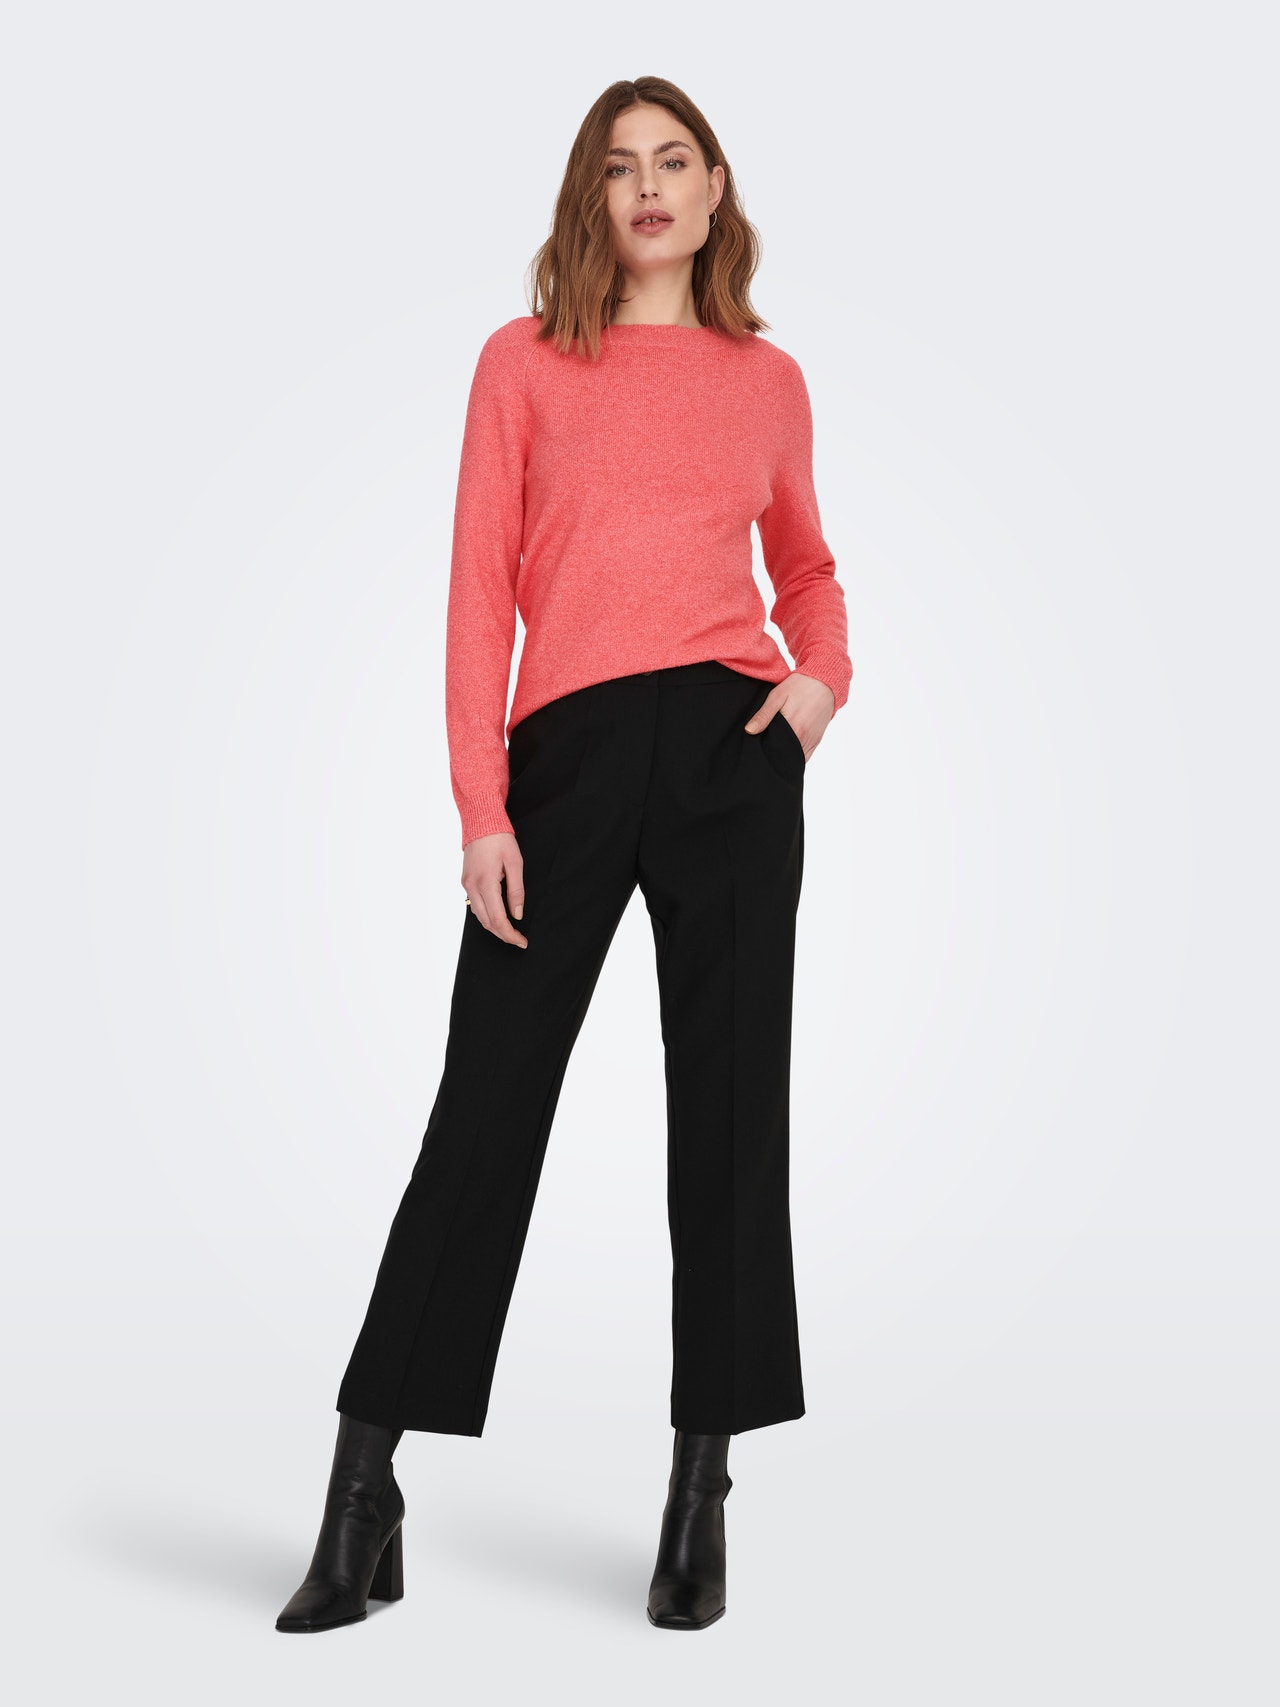 ONLY o-neck knitted pullover -Sun Kissed Coral - 15204279